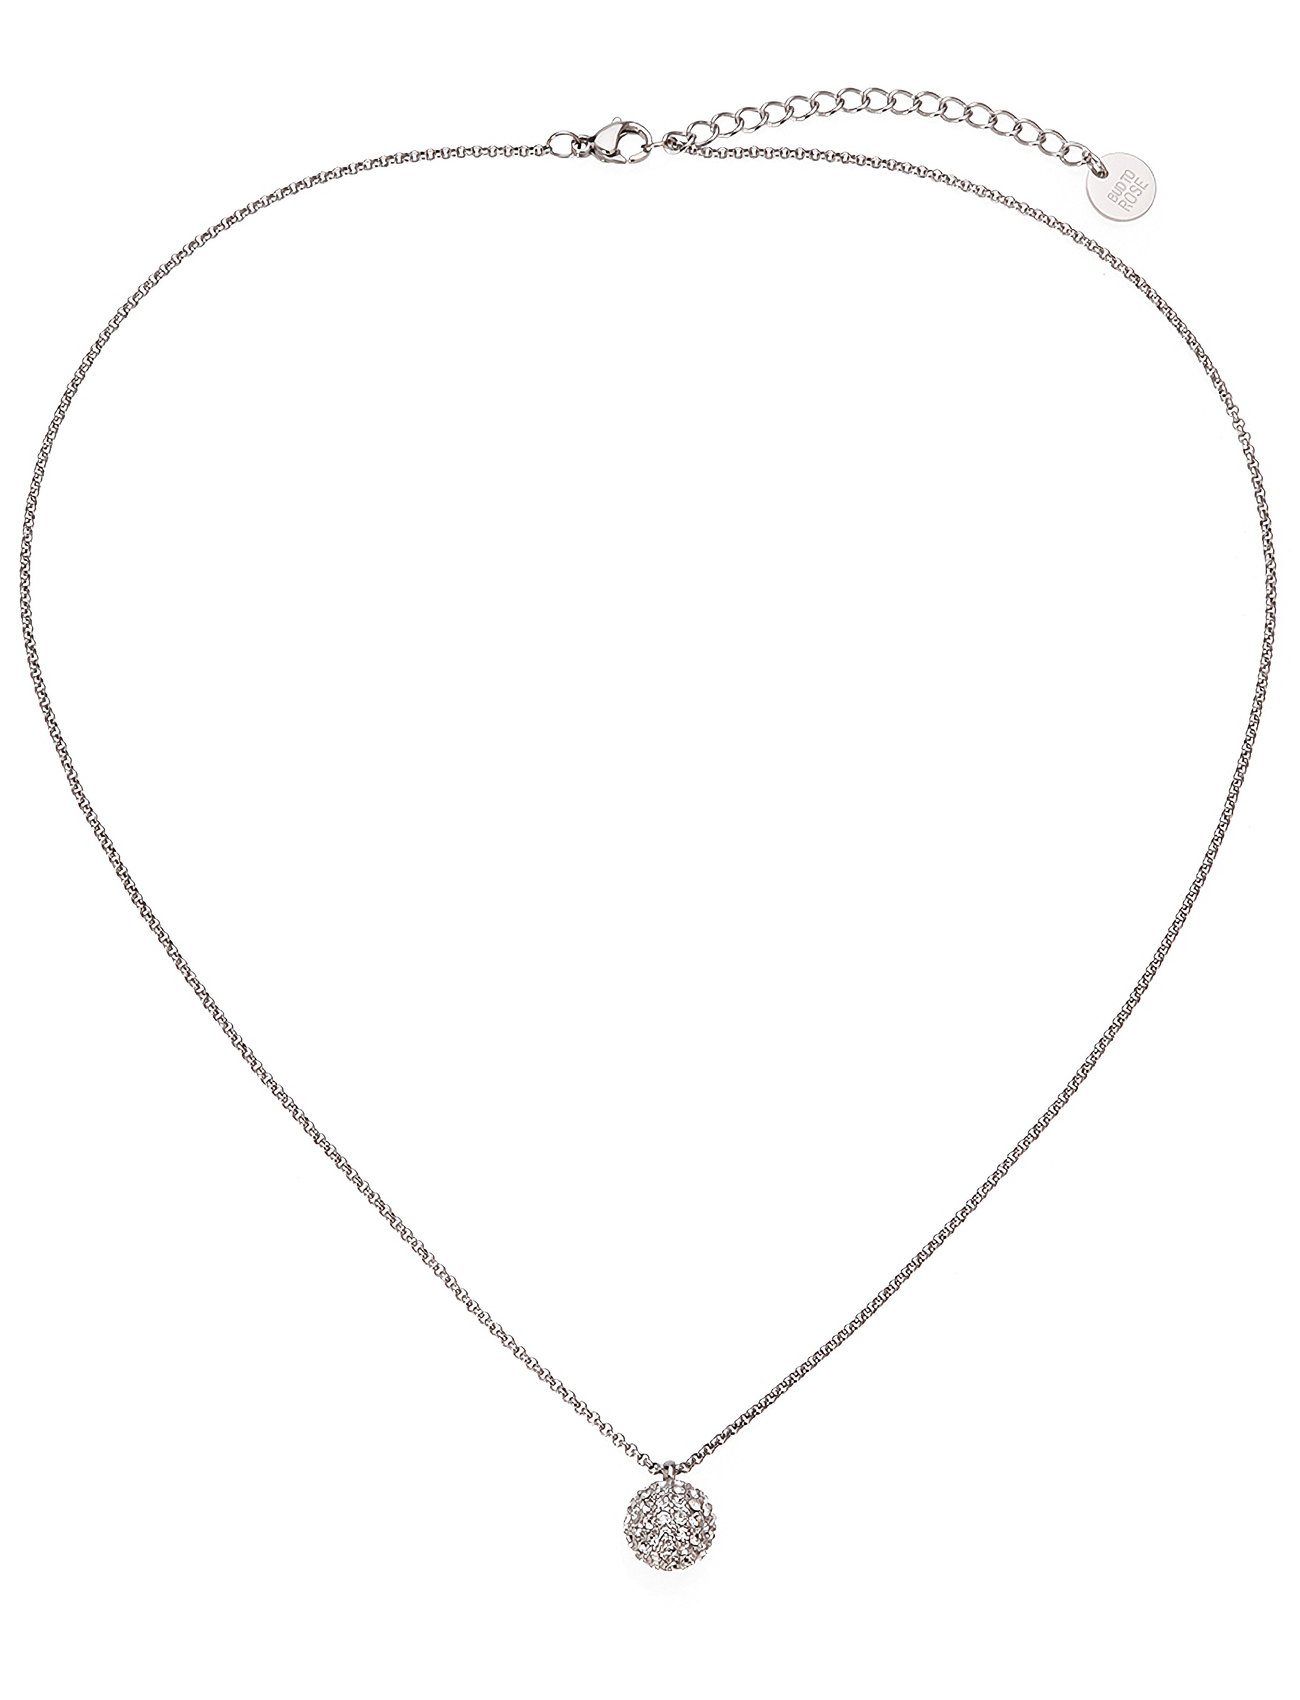 Bud to rose - Bullet Necklace Clear/Silver - halsband med hänge - silver - 1